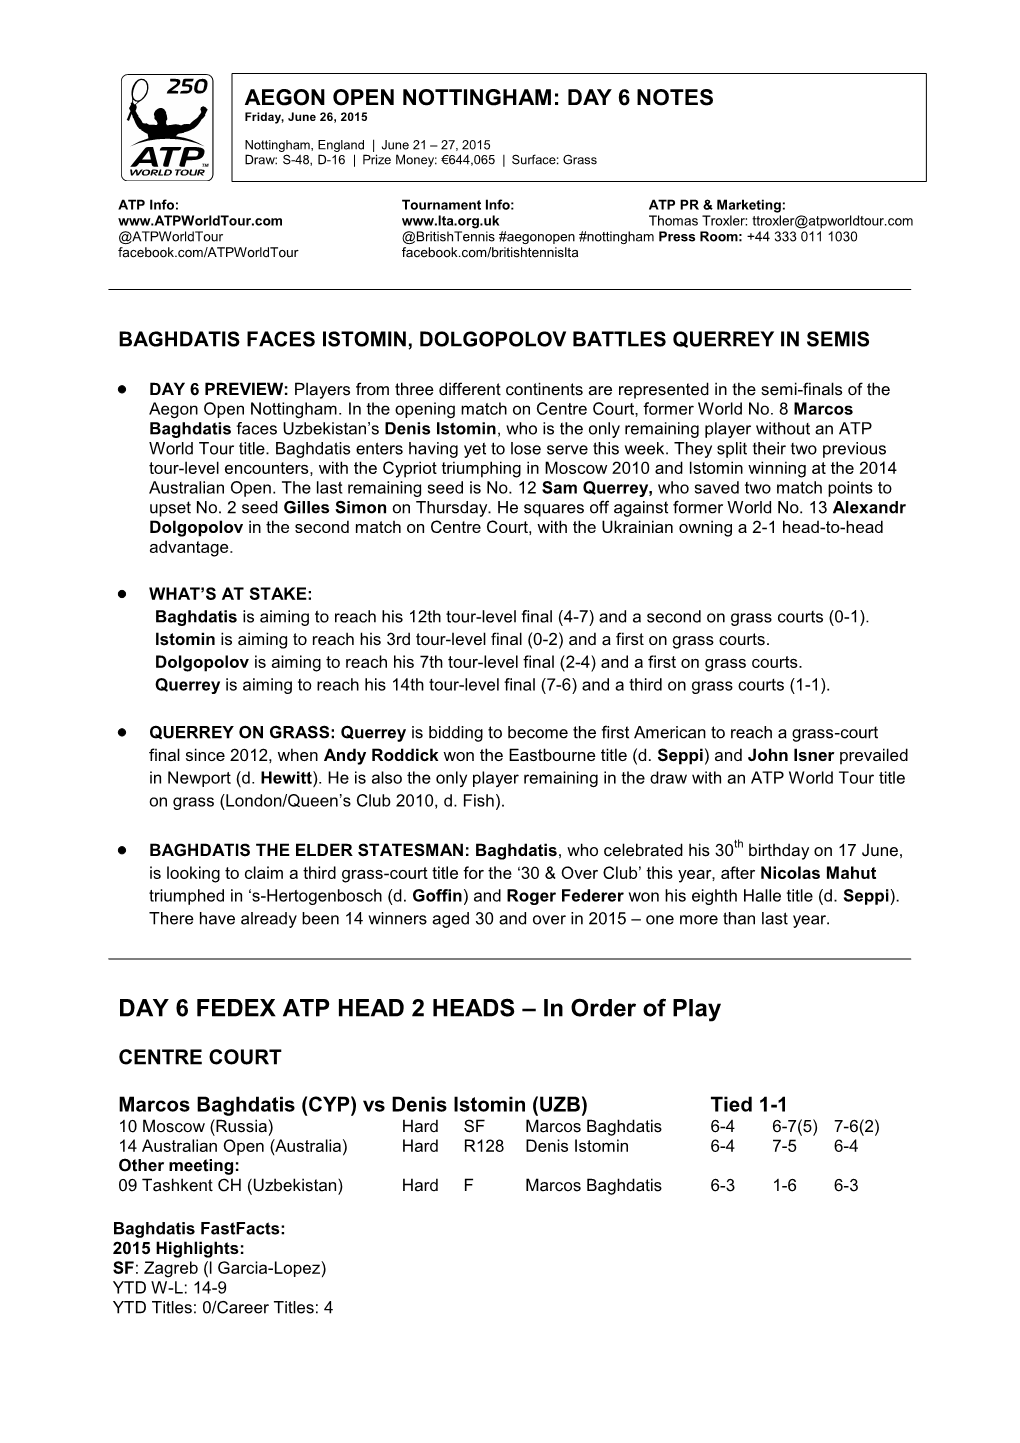 DAY 6 FEDEX ATP HEAD 2 HEADS – in Order of Play